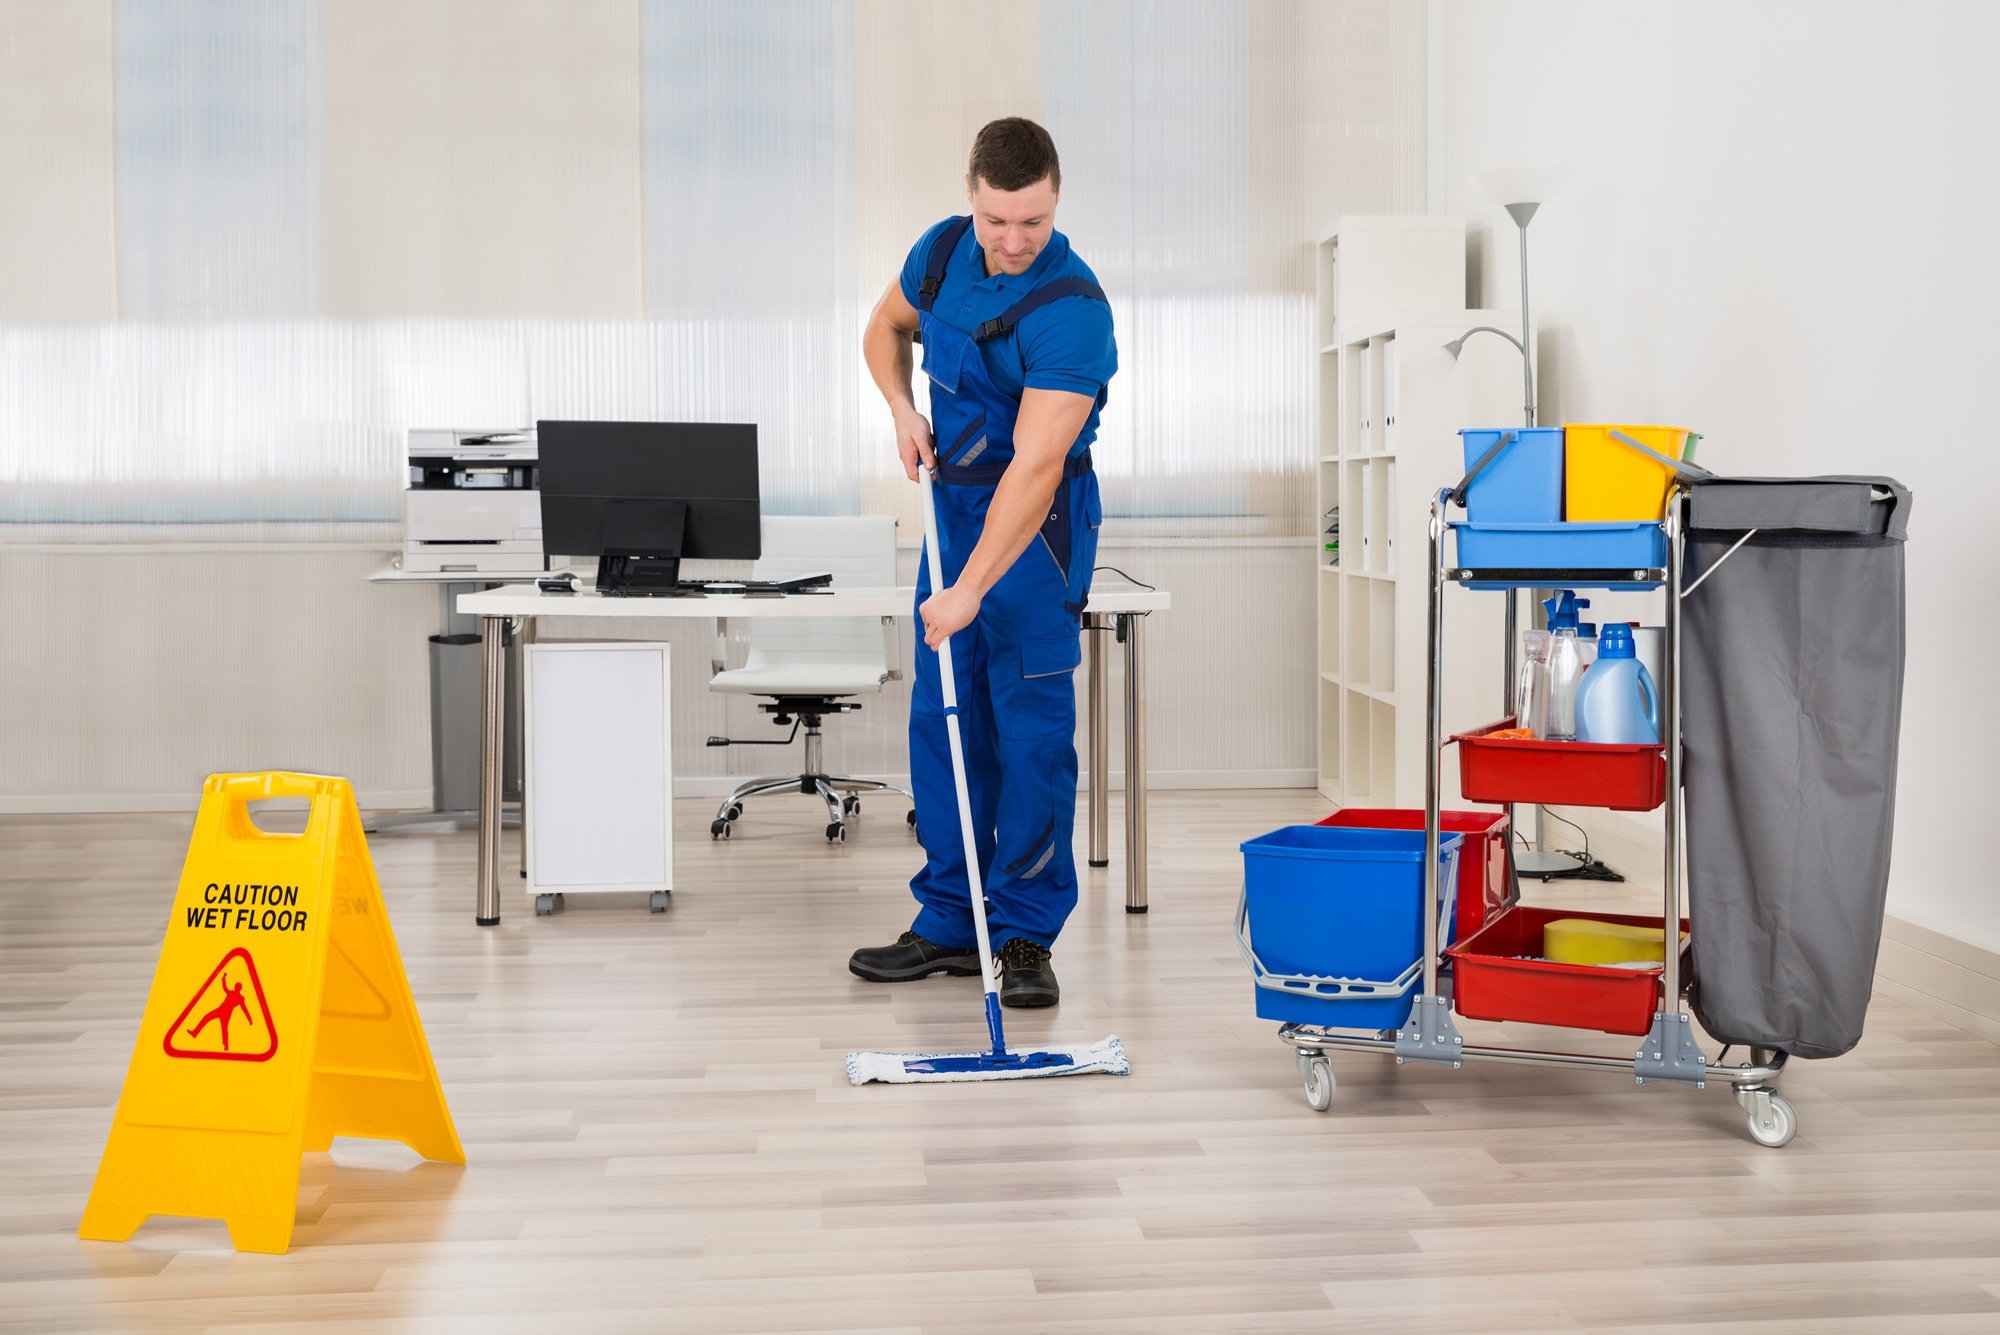 What are the different services offered by Commercial cleaning companies?